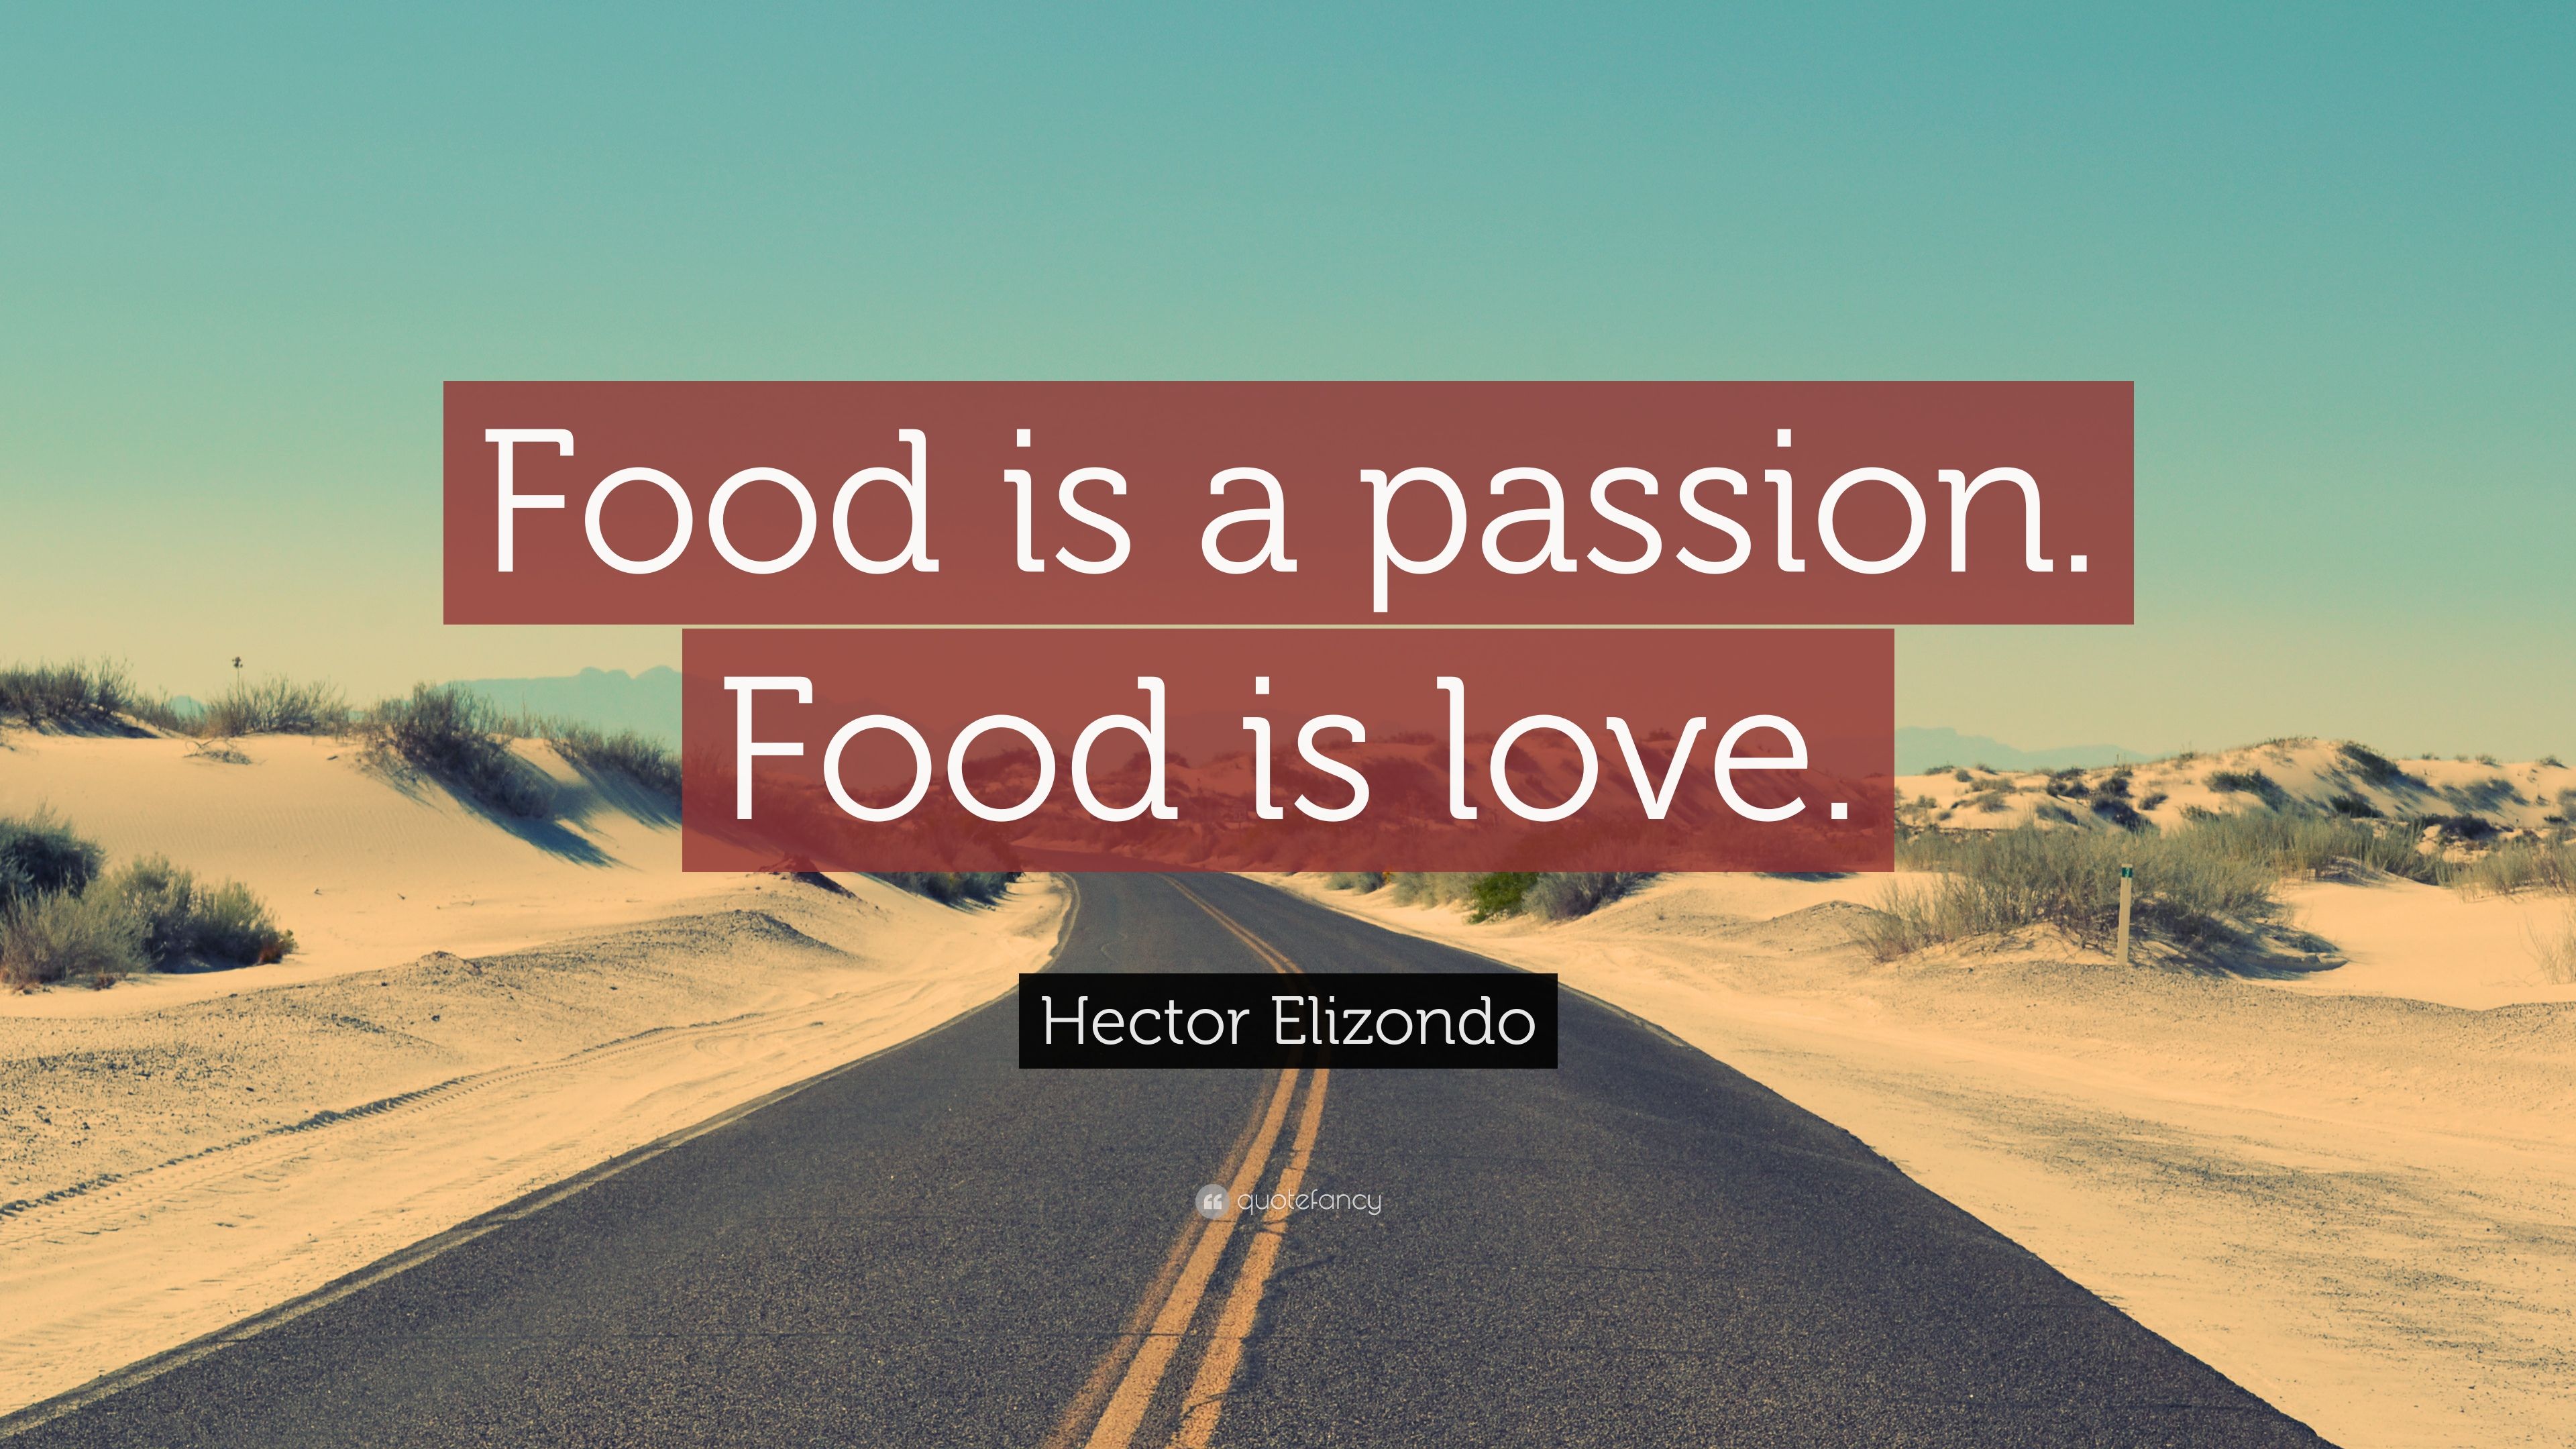 Hector Elizondo Quote: “Food is a passion. Food is love.” (12 wallpaper)